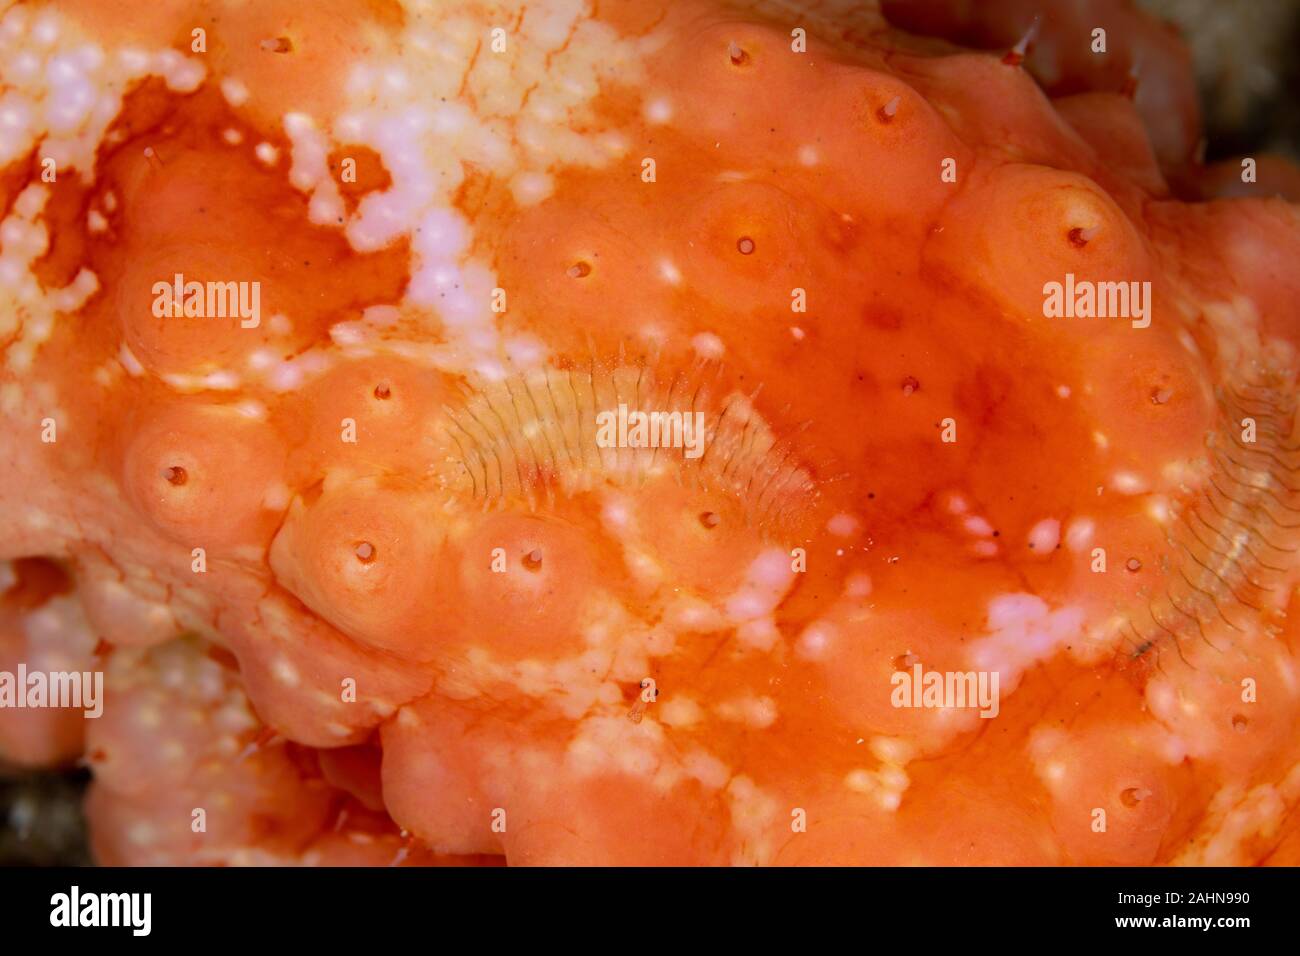 Sea Cucumber Scale Worm, Gastrolepidia clavigera, crawling on its host Stock Photo